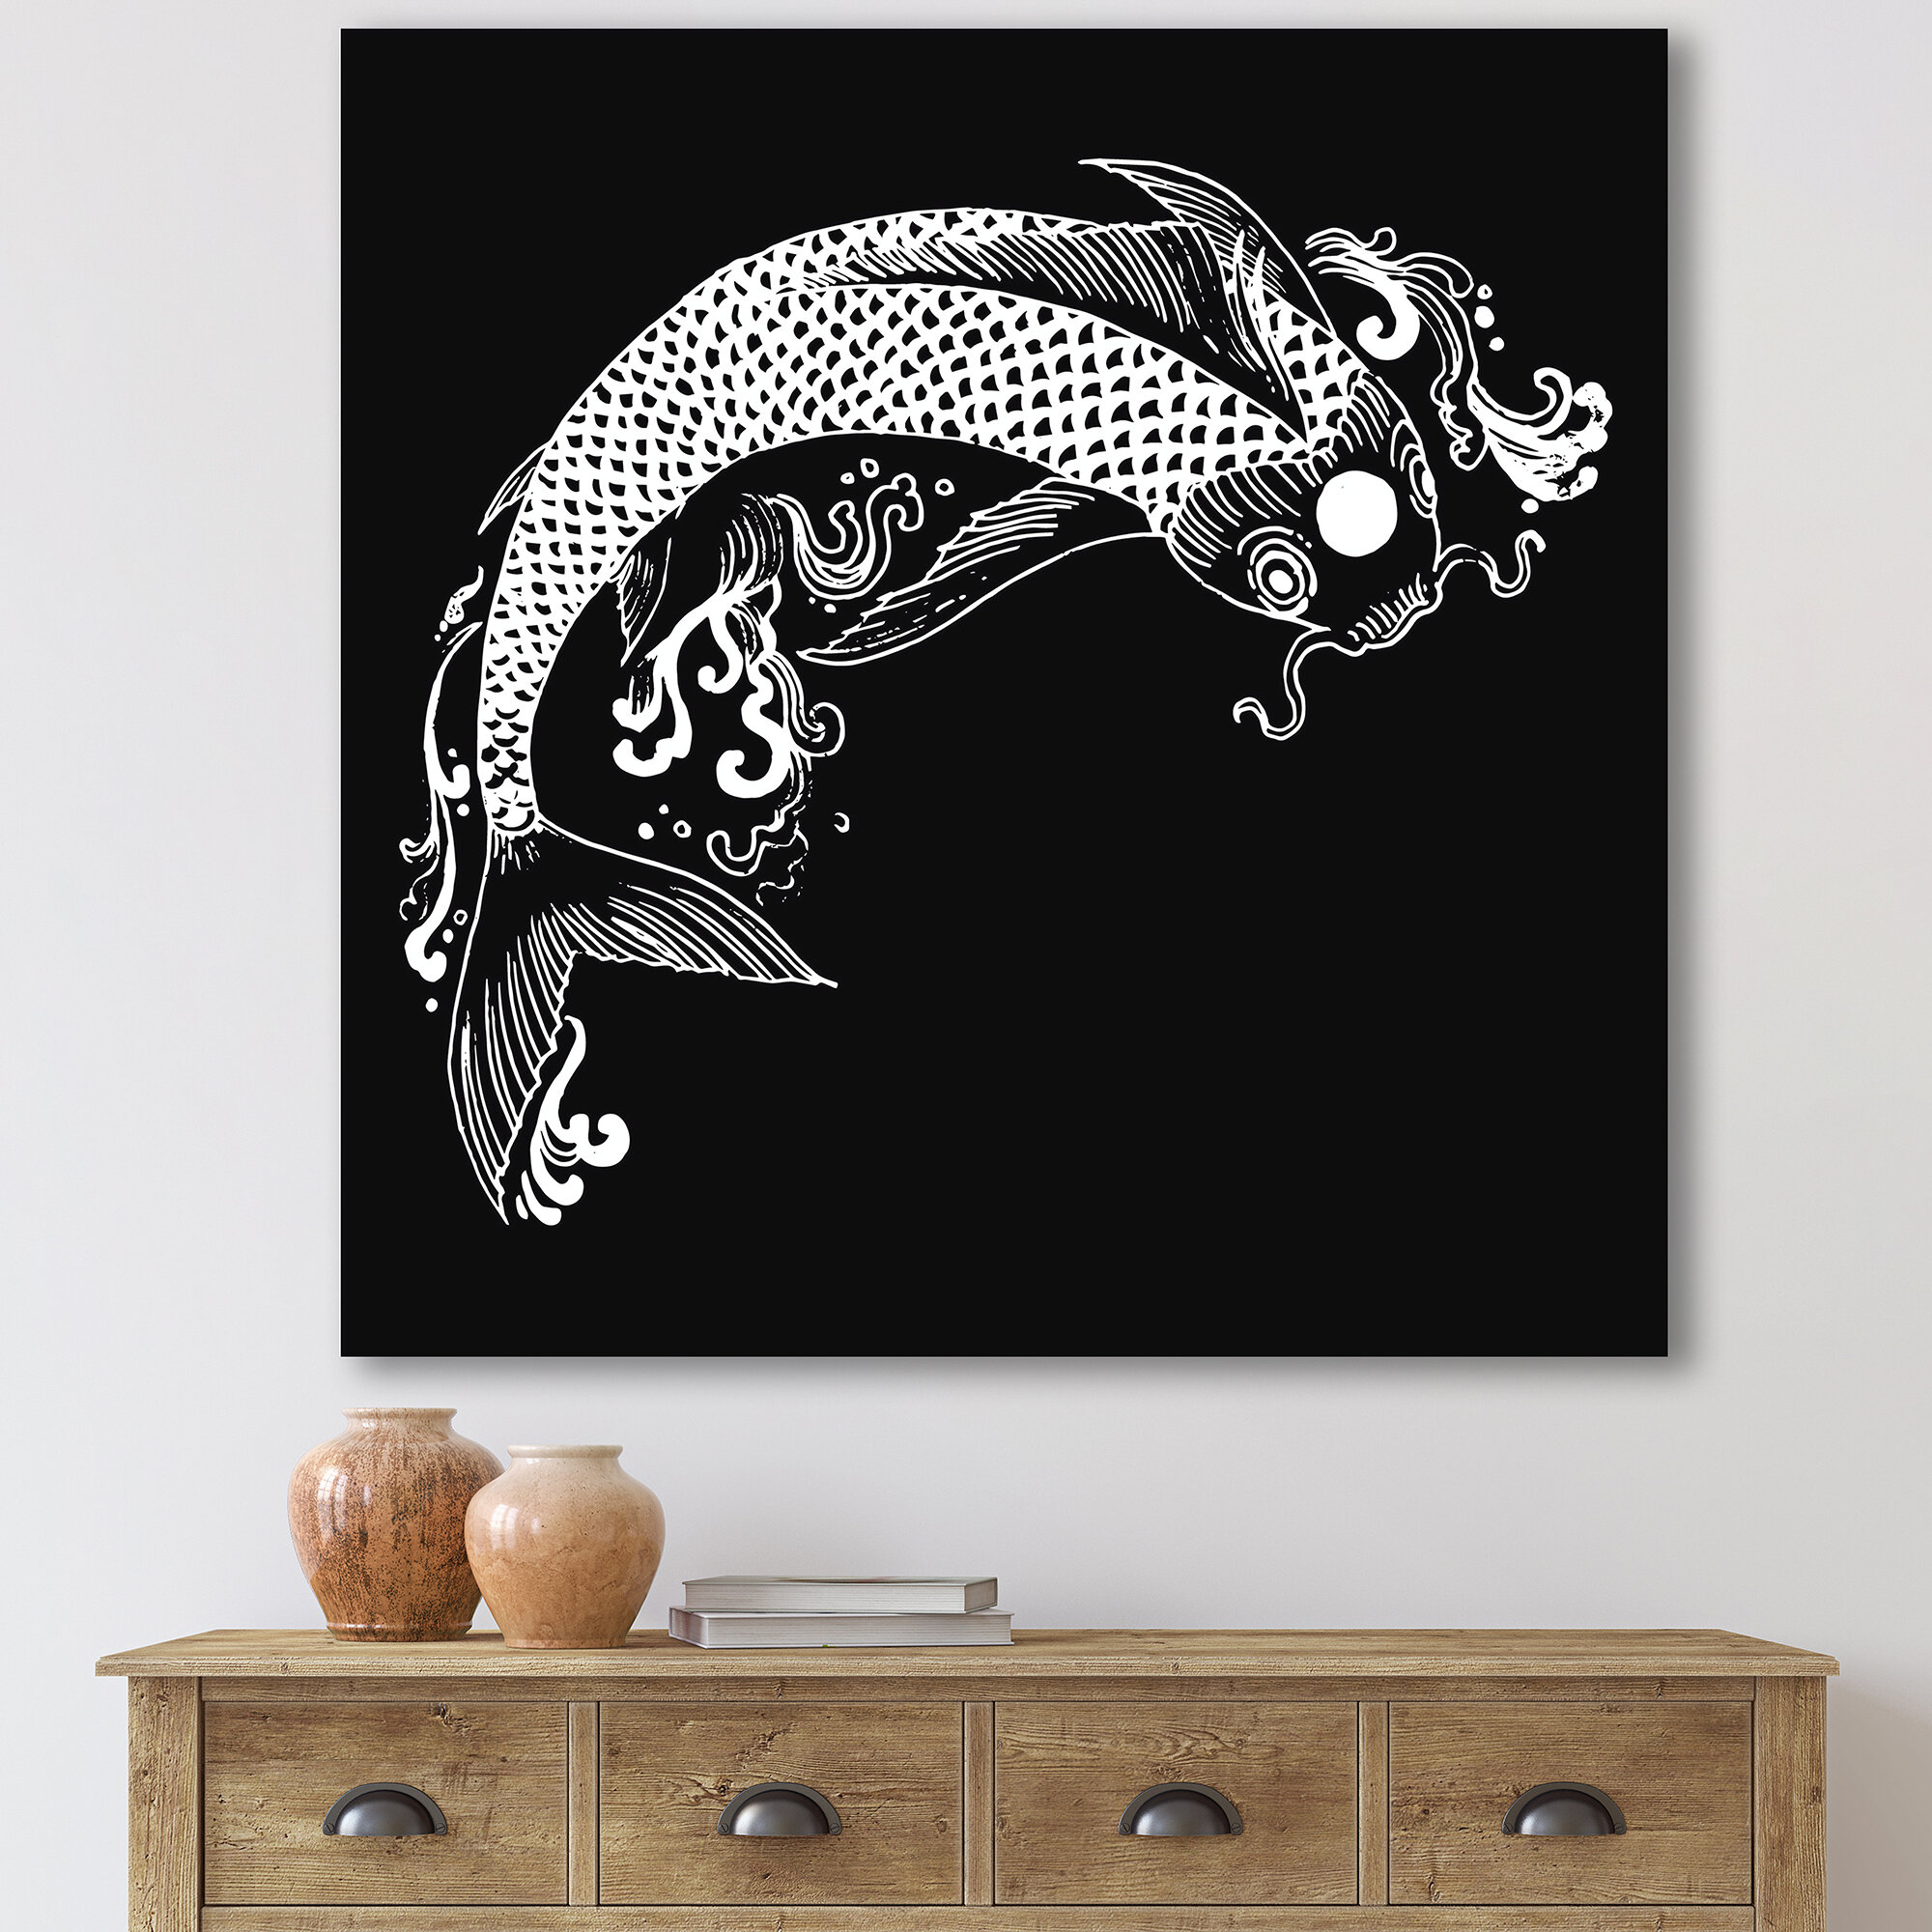 Chinoiserie Koi Fish I - Graphic Art Print East Urban Home Size: 36 H x 36 W x 1.5 D, Format: White Picture Frame